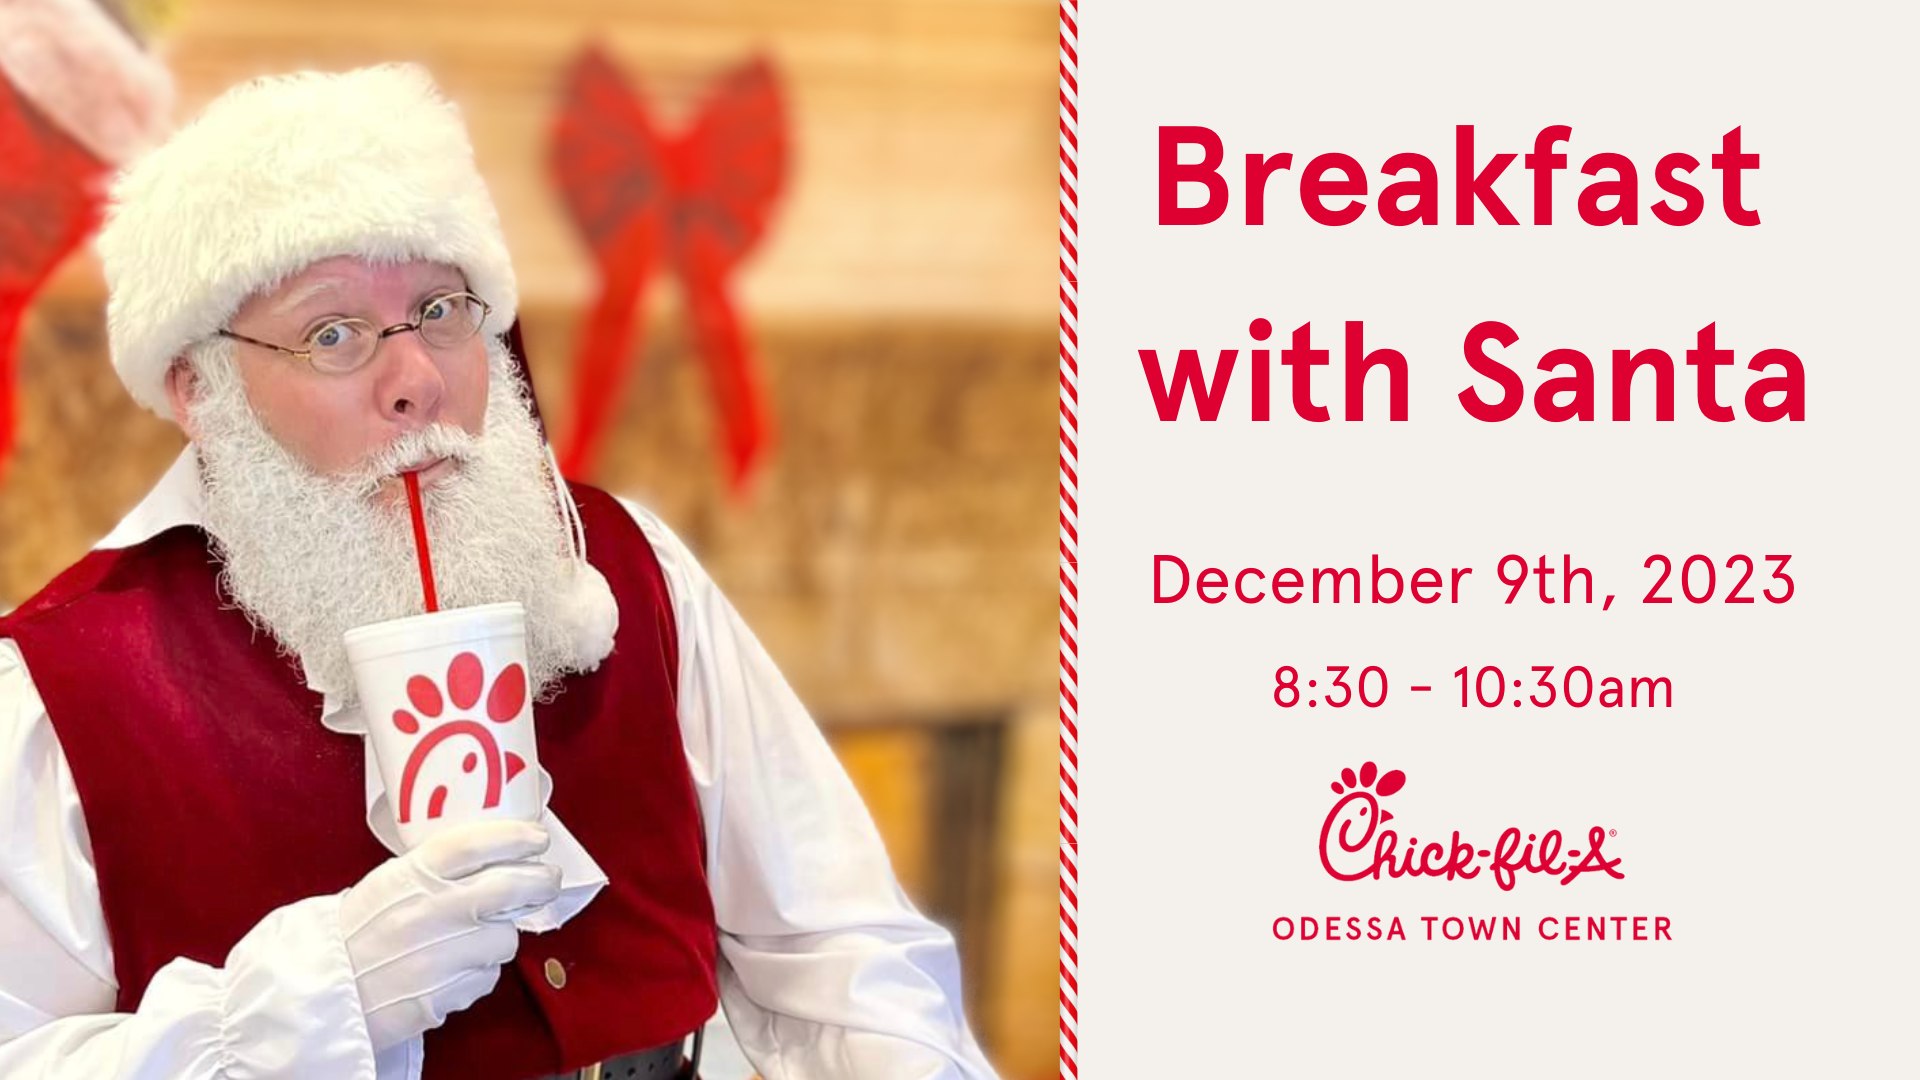 Breakfast with Santa at Chick Fil A on Sunday, December 9, 2023